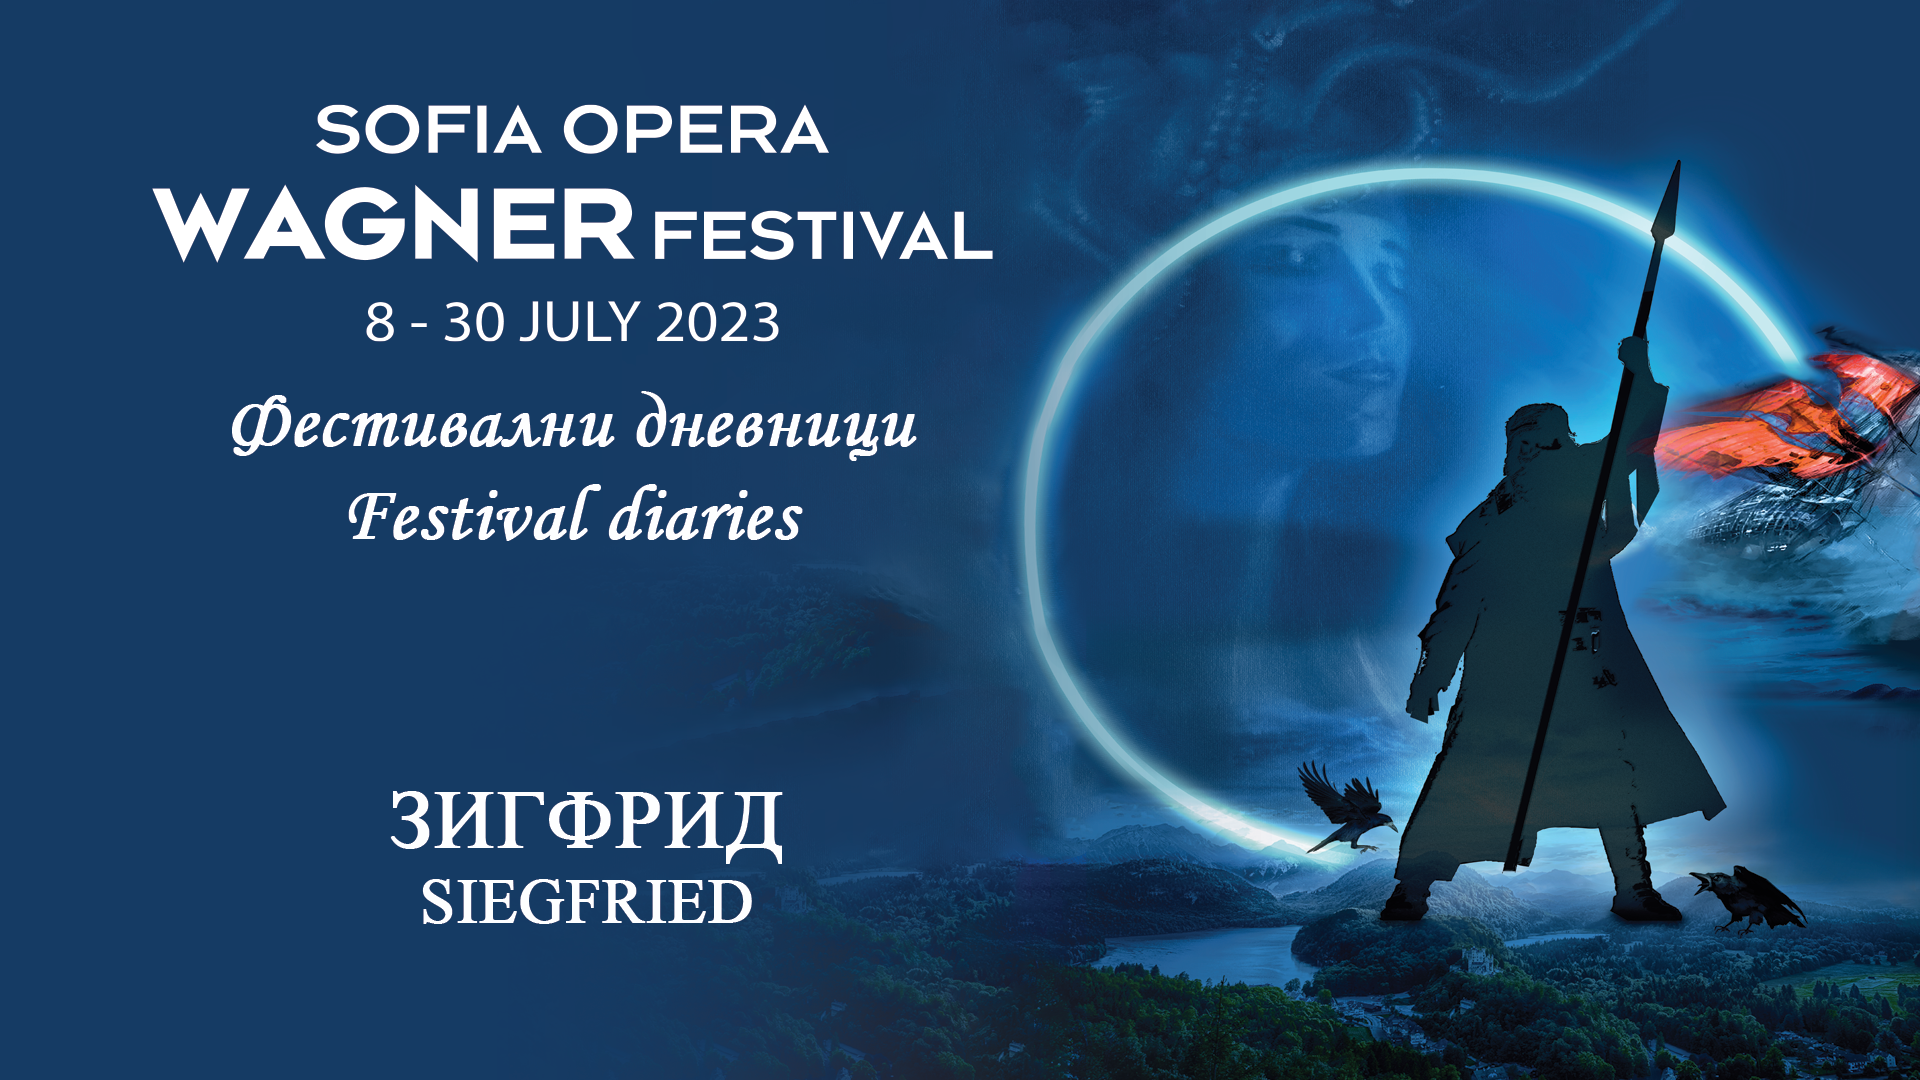 A touching evening at the Sofia Opera "Siegfried" enchanted the audience